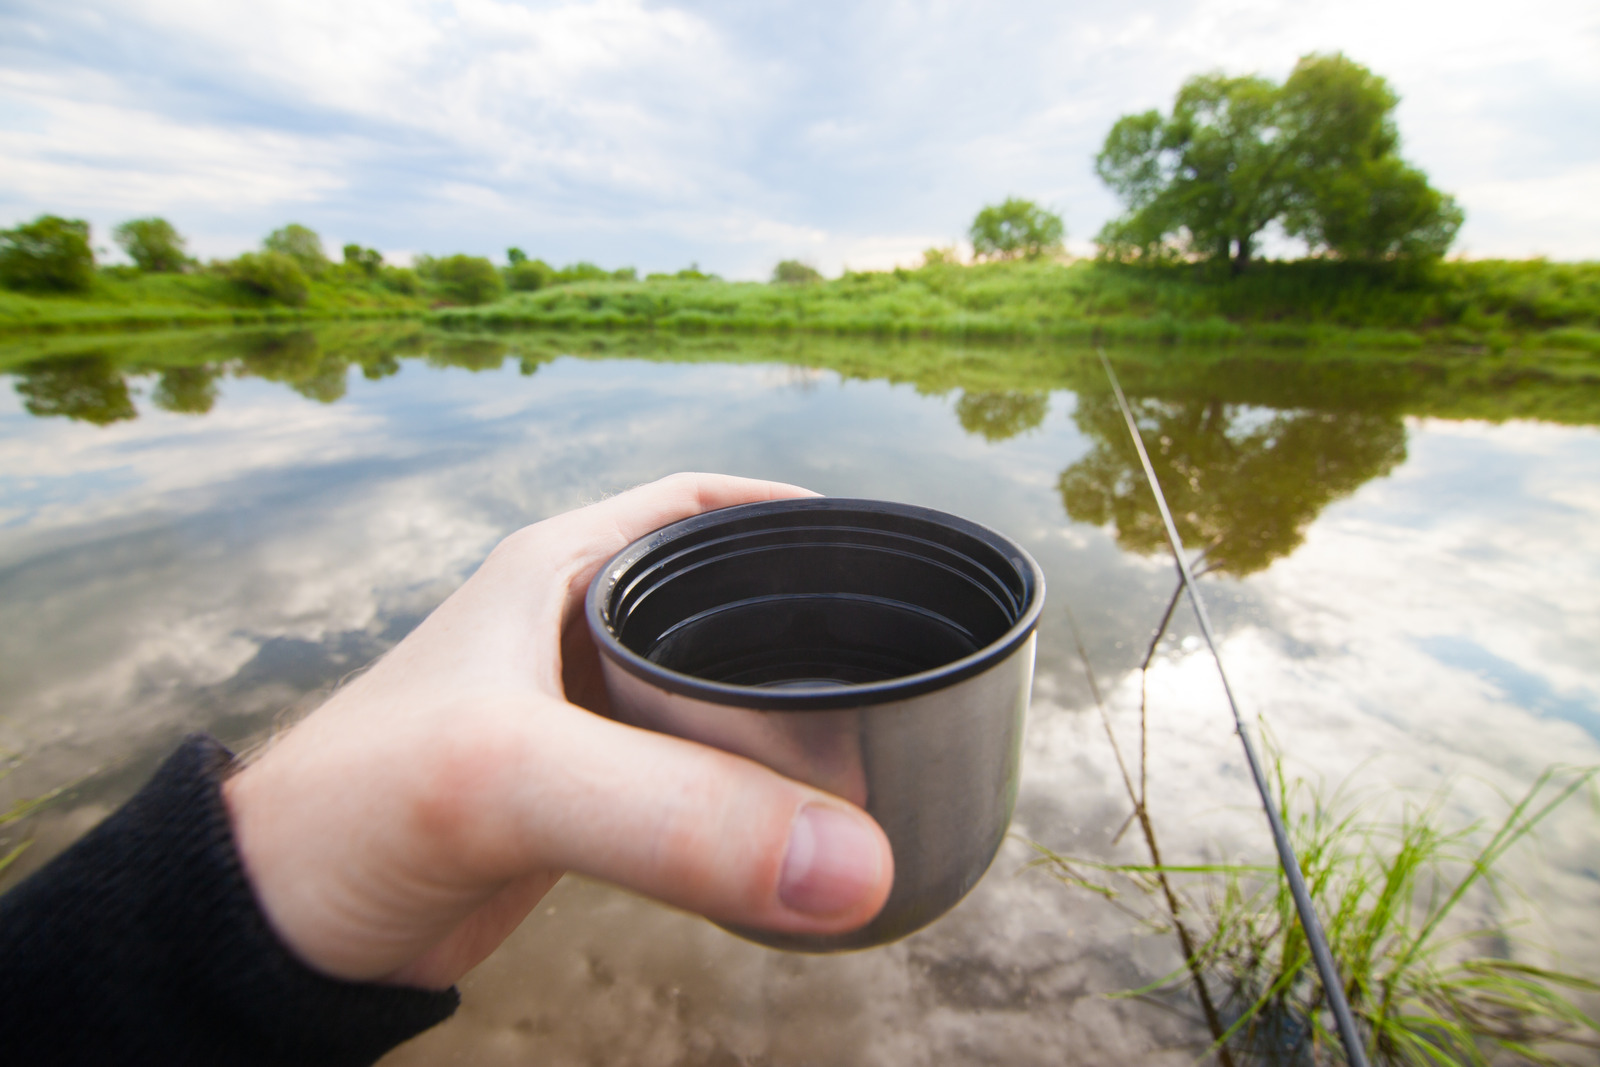 Fisherman is going to drink tea from thermos during fishing